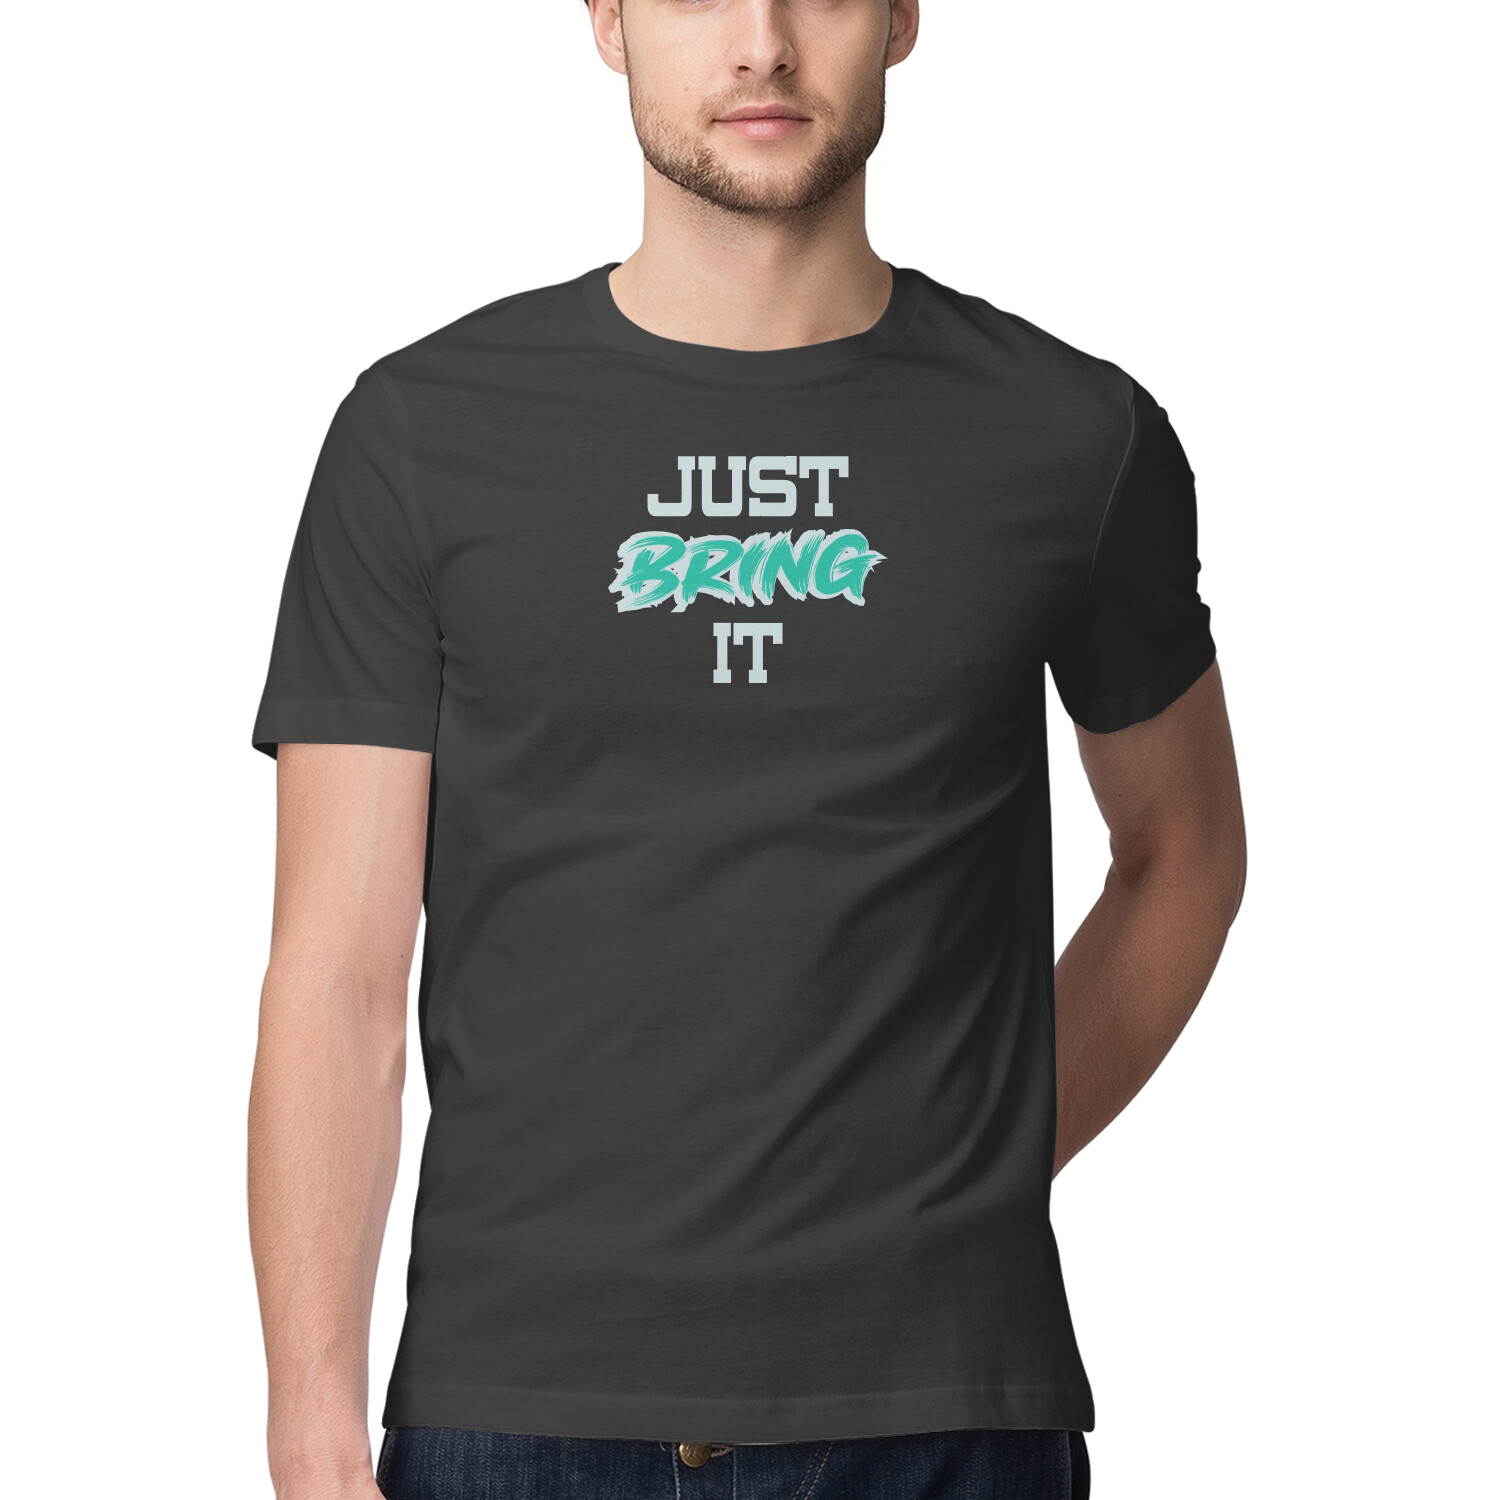 JUST BRING IT BLACK TEE, Funny T-shirt quotes and sayings